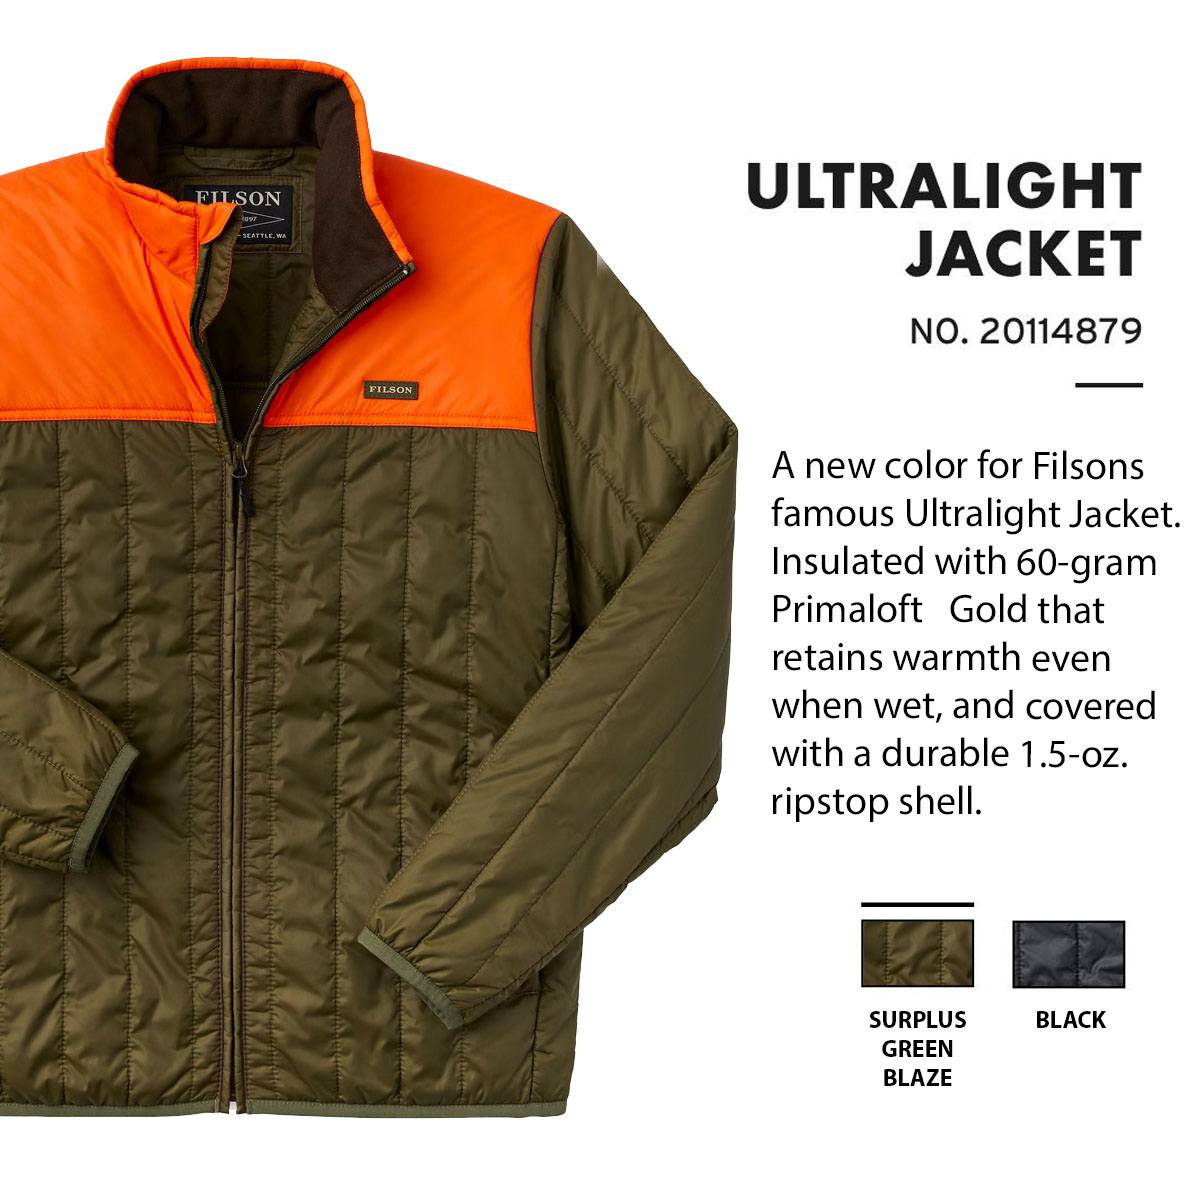 Filson Ultralight Jacket Surplus Green Blaze, perfect as an outer layer or underneath a heavy jacket for warmth in extreme cold